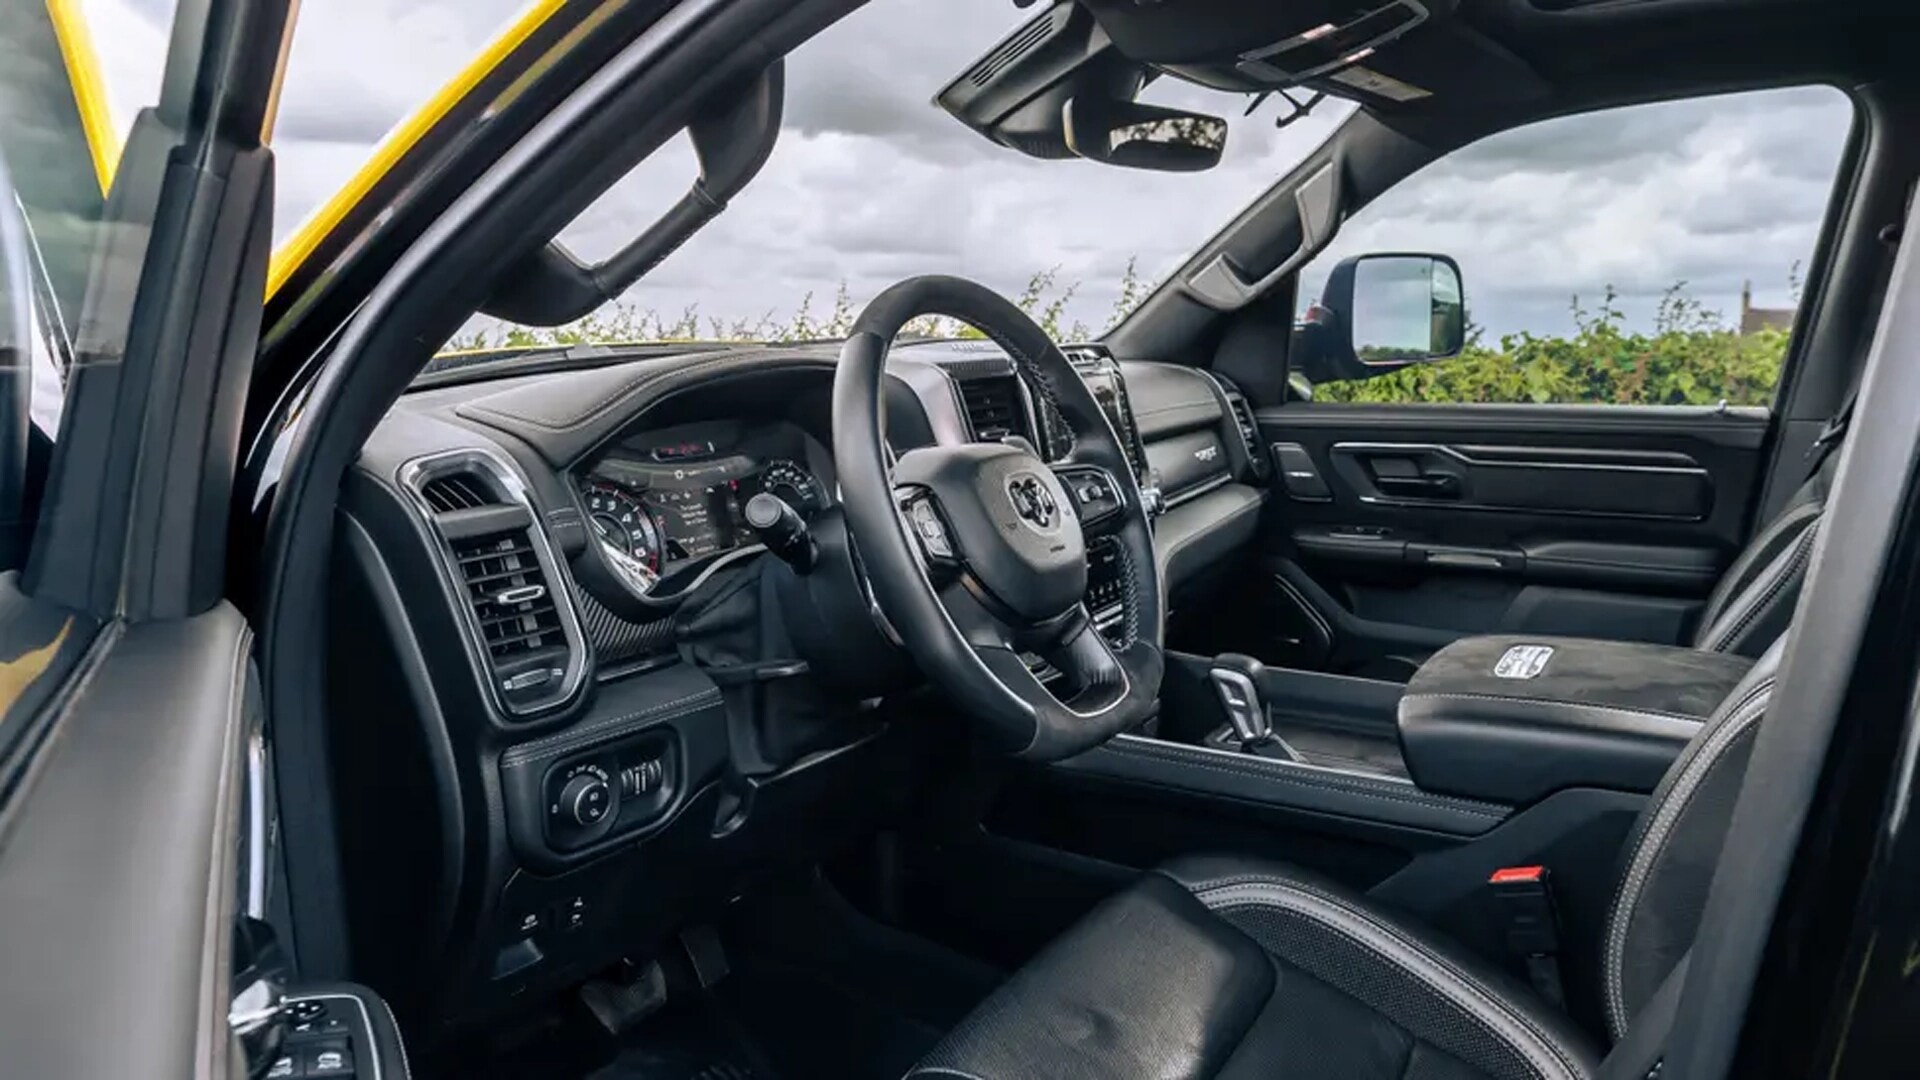 The Steering And Dashboard Of The Hennessey Mammoth 1000 TRX Last Stand (Credits TopGear)